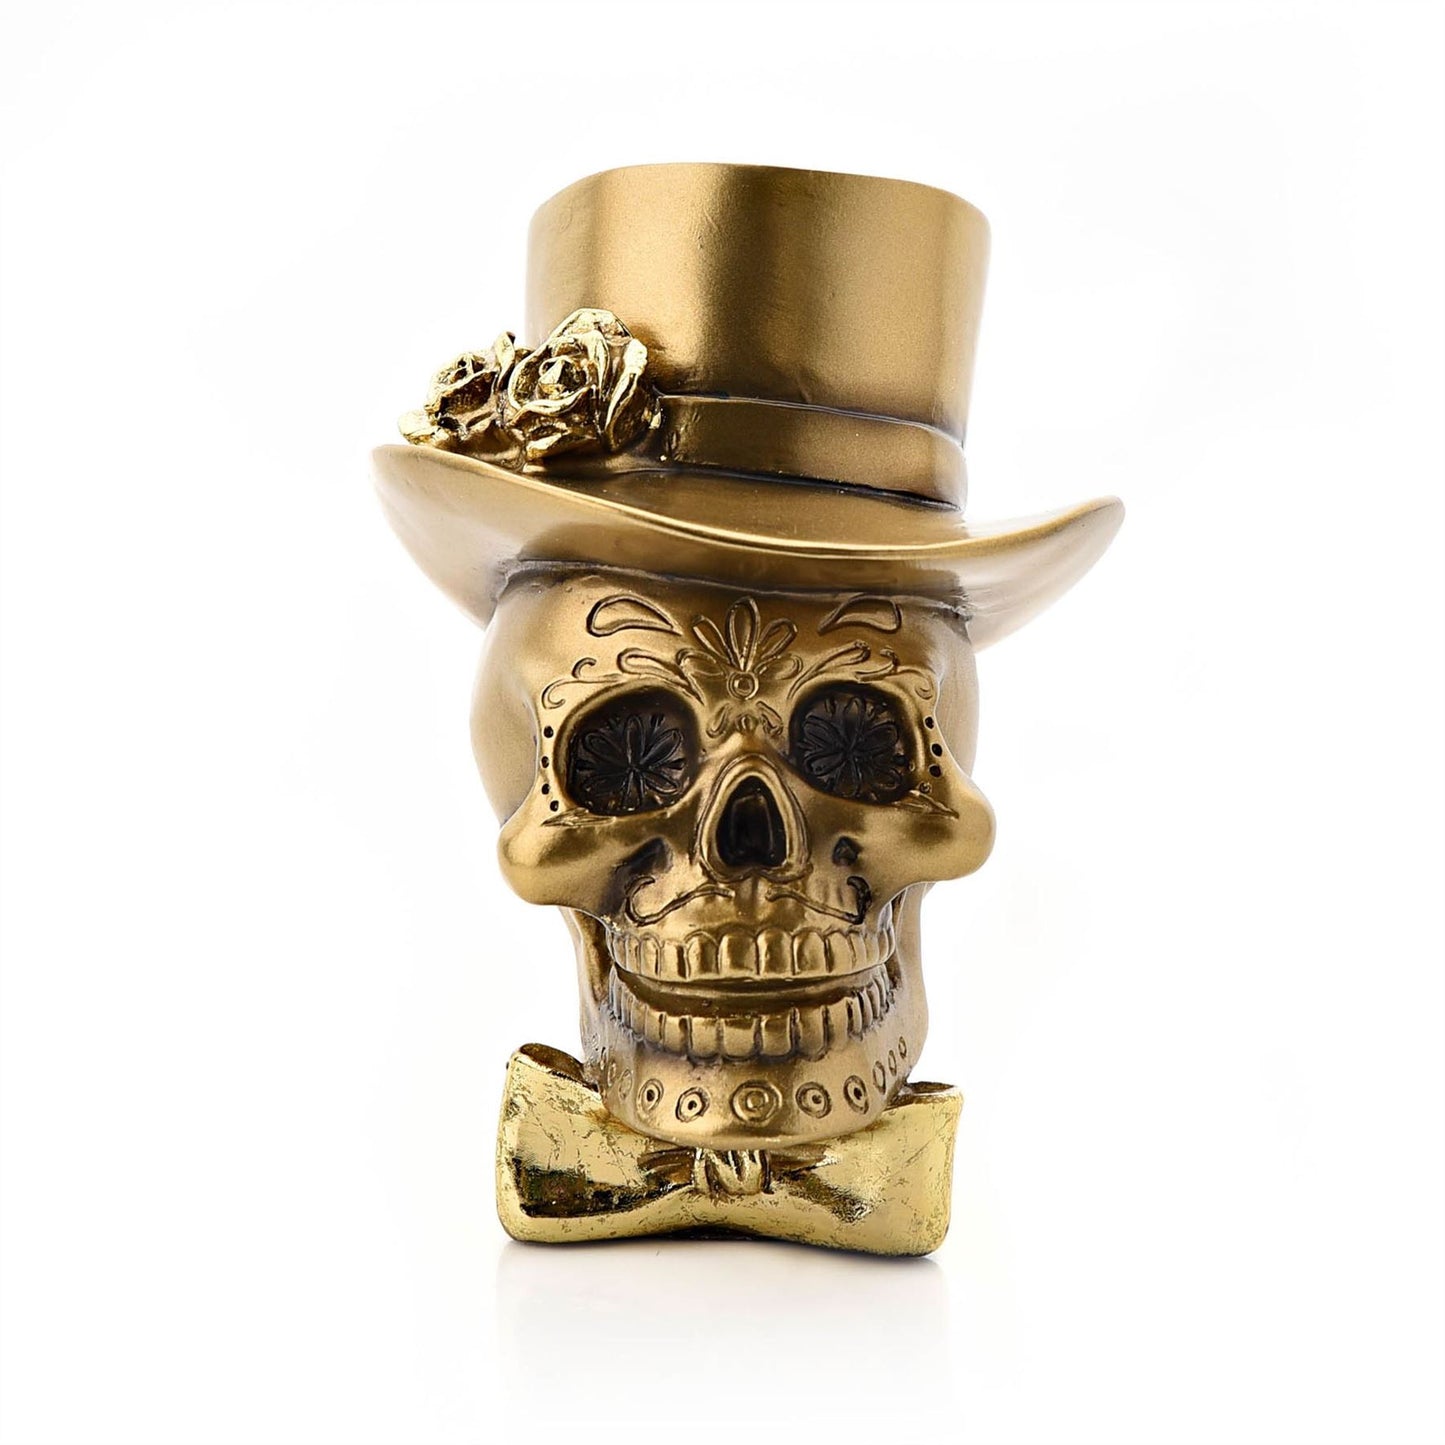 Gold Skull with Top Hat Resin Figurine